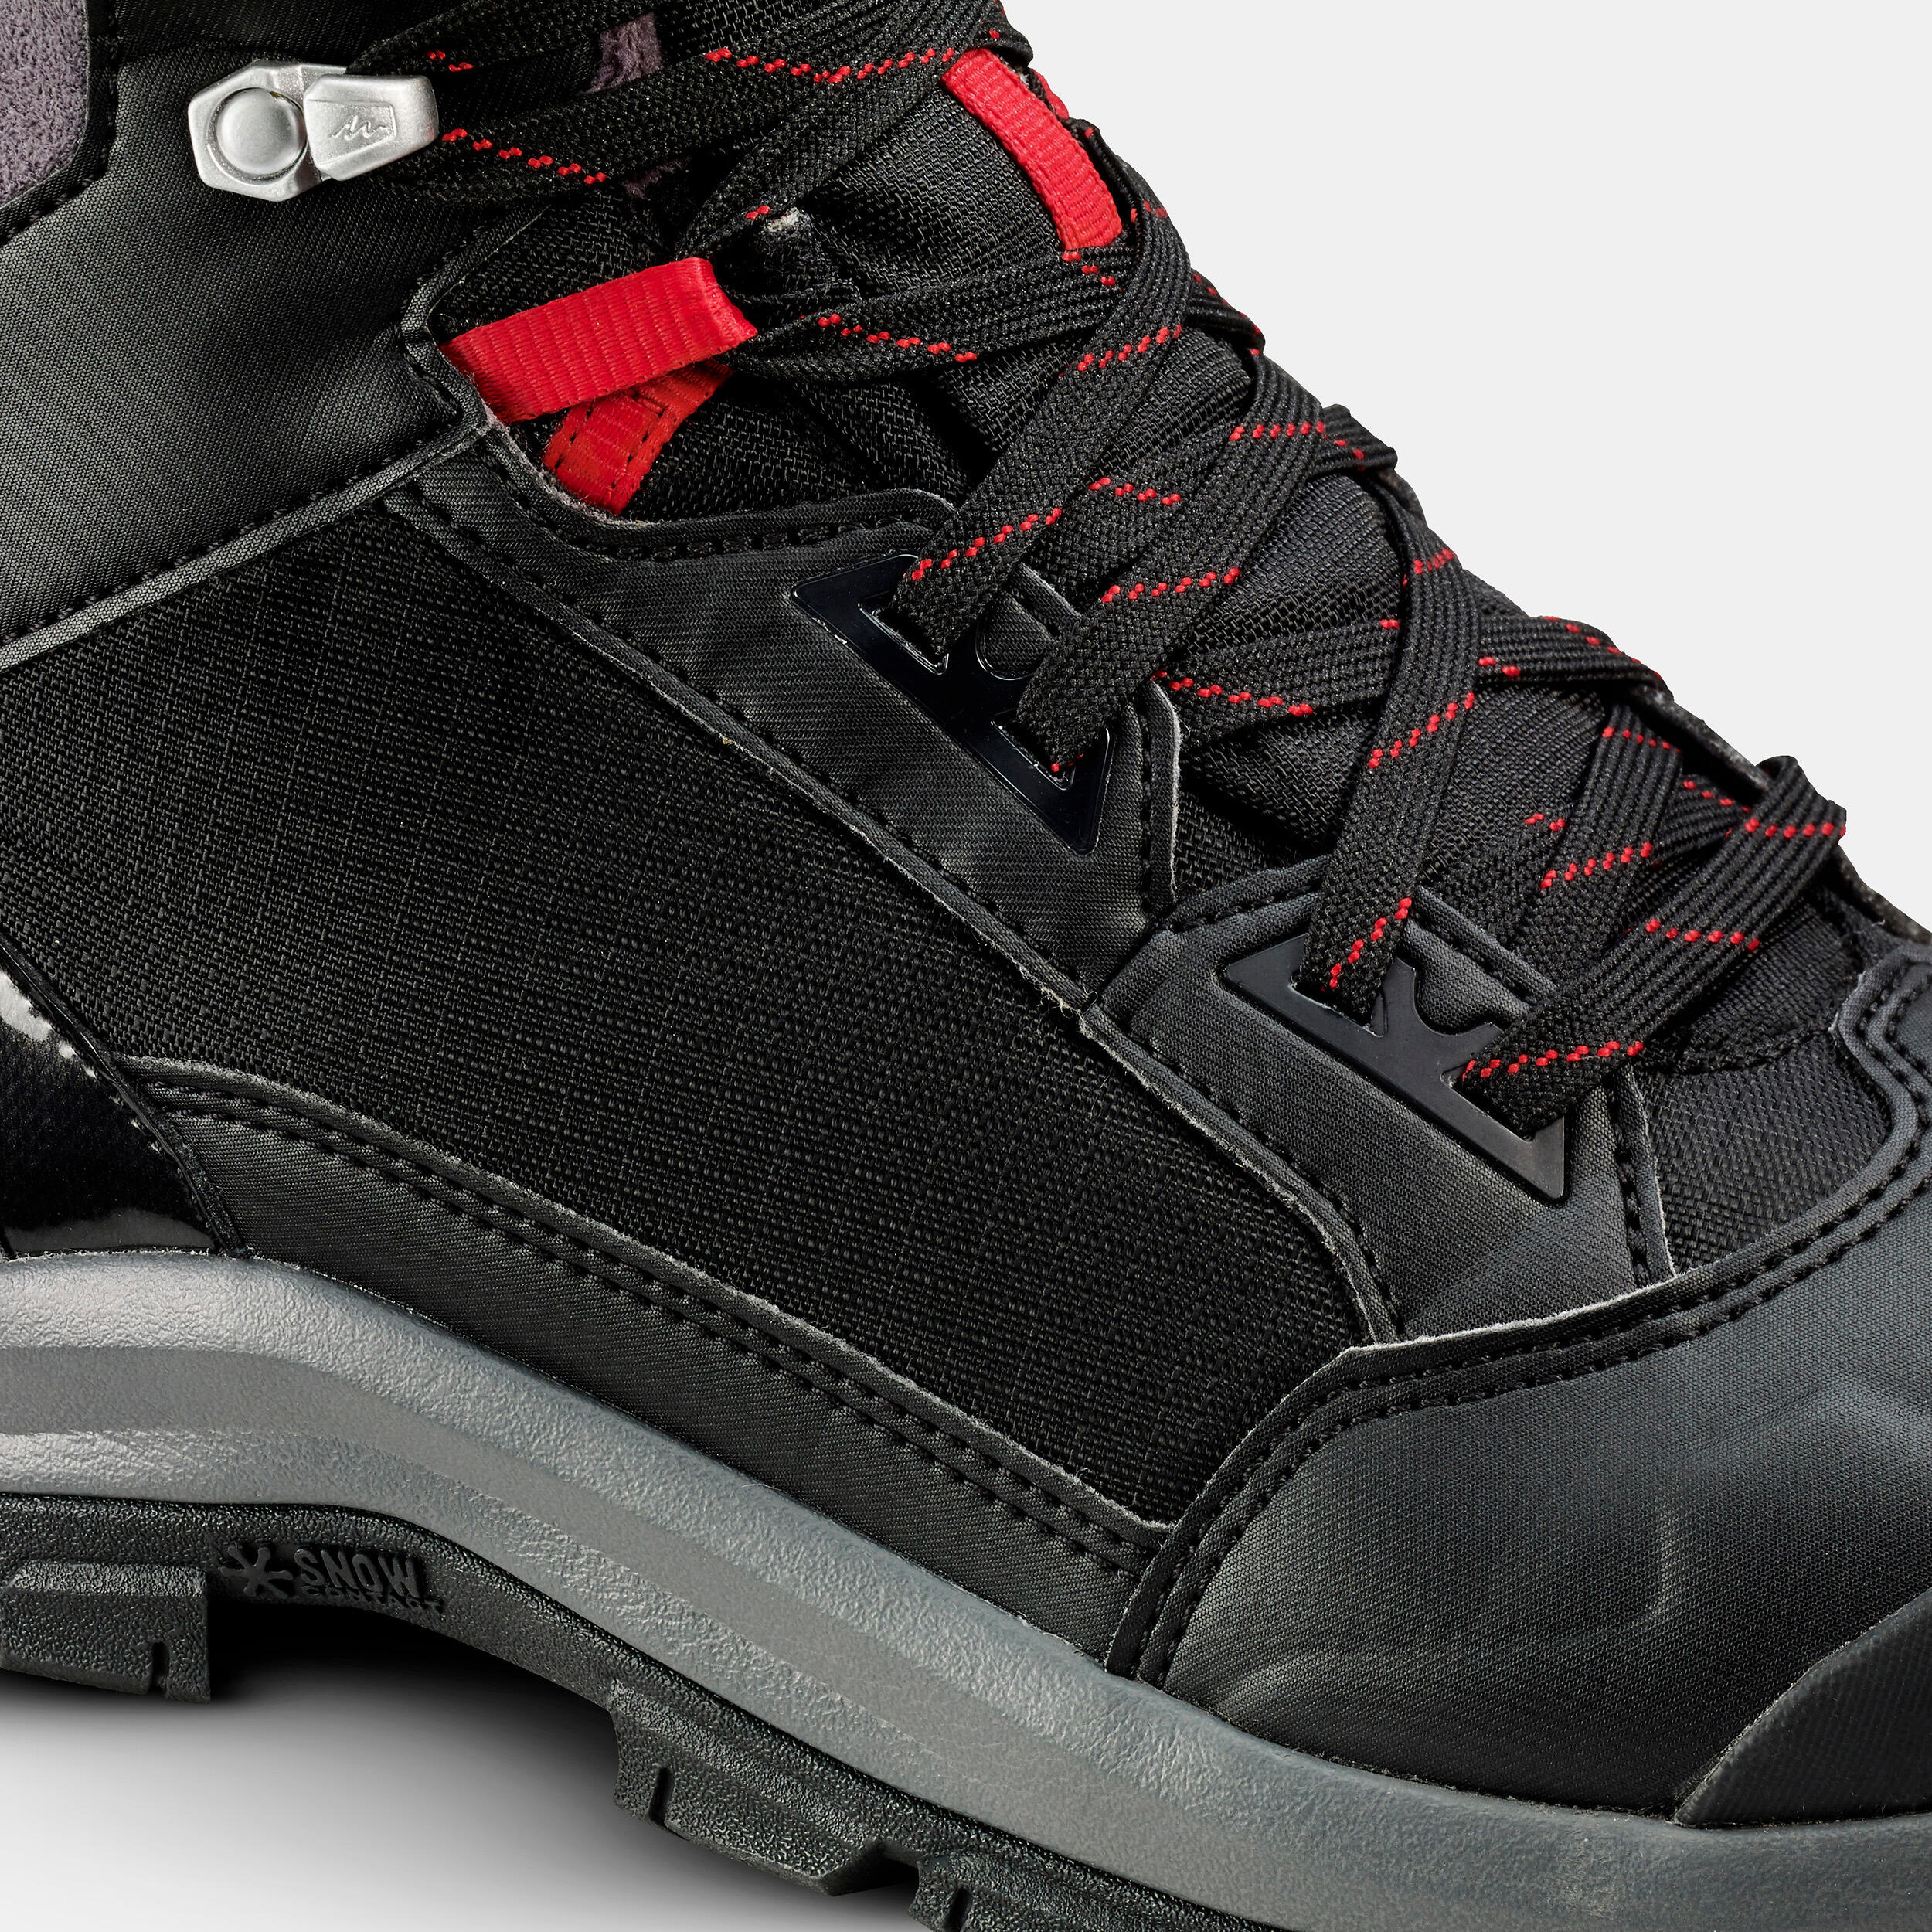 Men’s Warm and Waterproof Hiking Boots - SH500 mountain MID 5/9